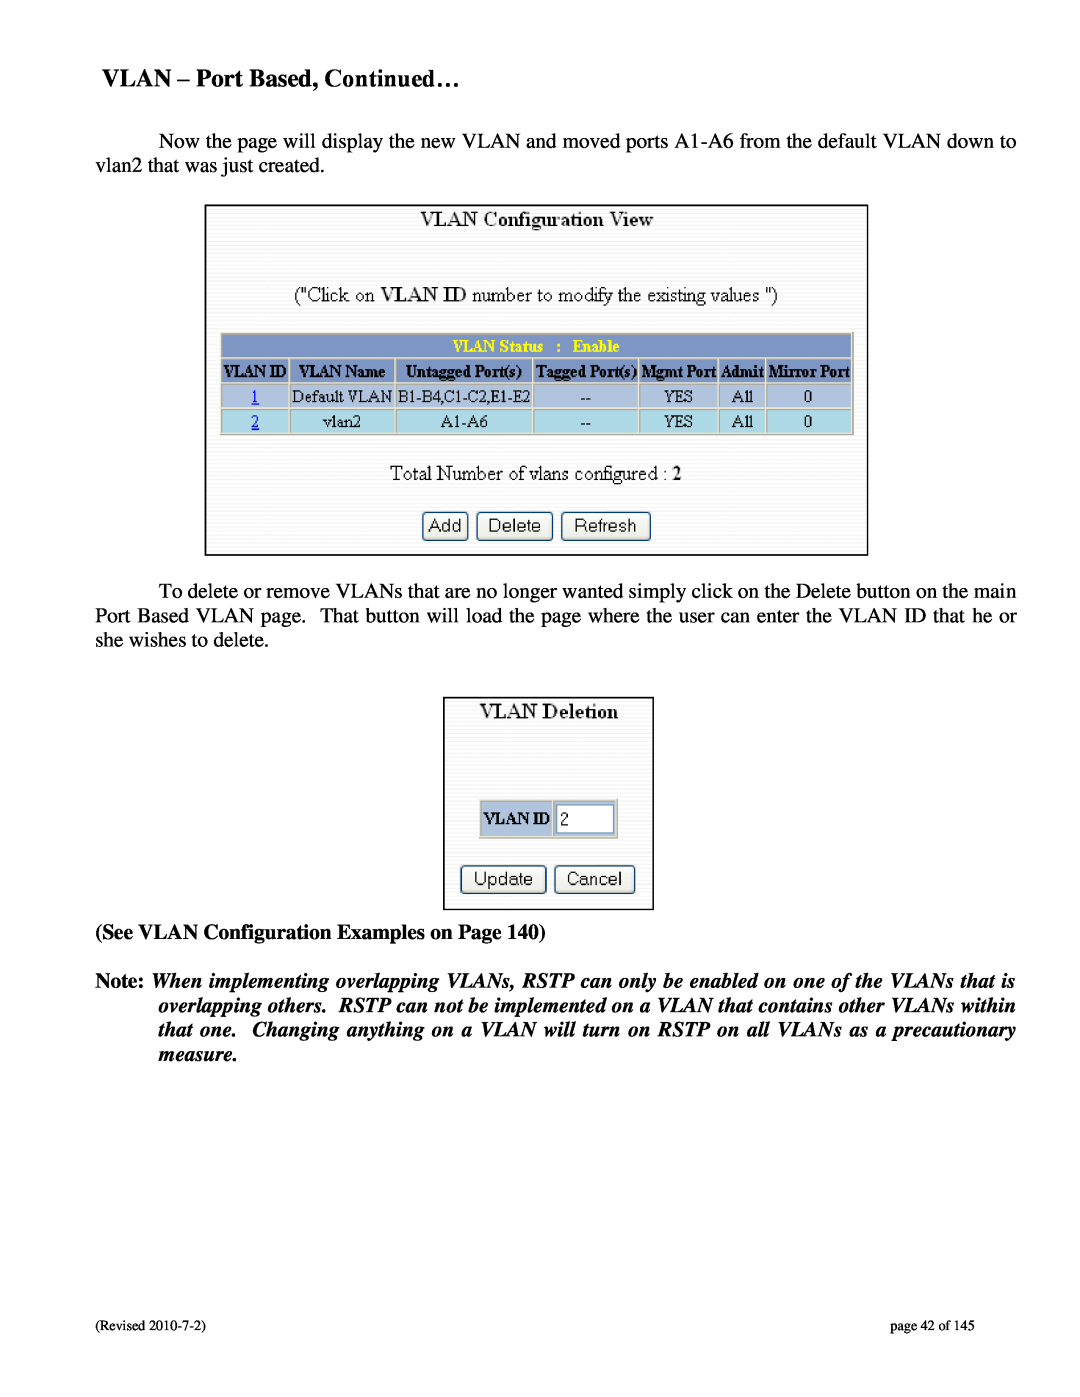 N-Tron 9000 user manual VLAN - Port Based, Continued…, See VLAN Configuration Examples on Page, page 42 of 